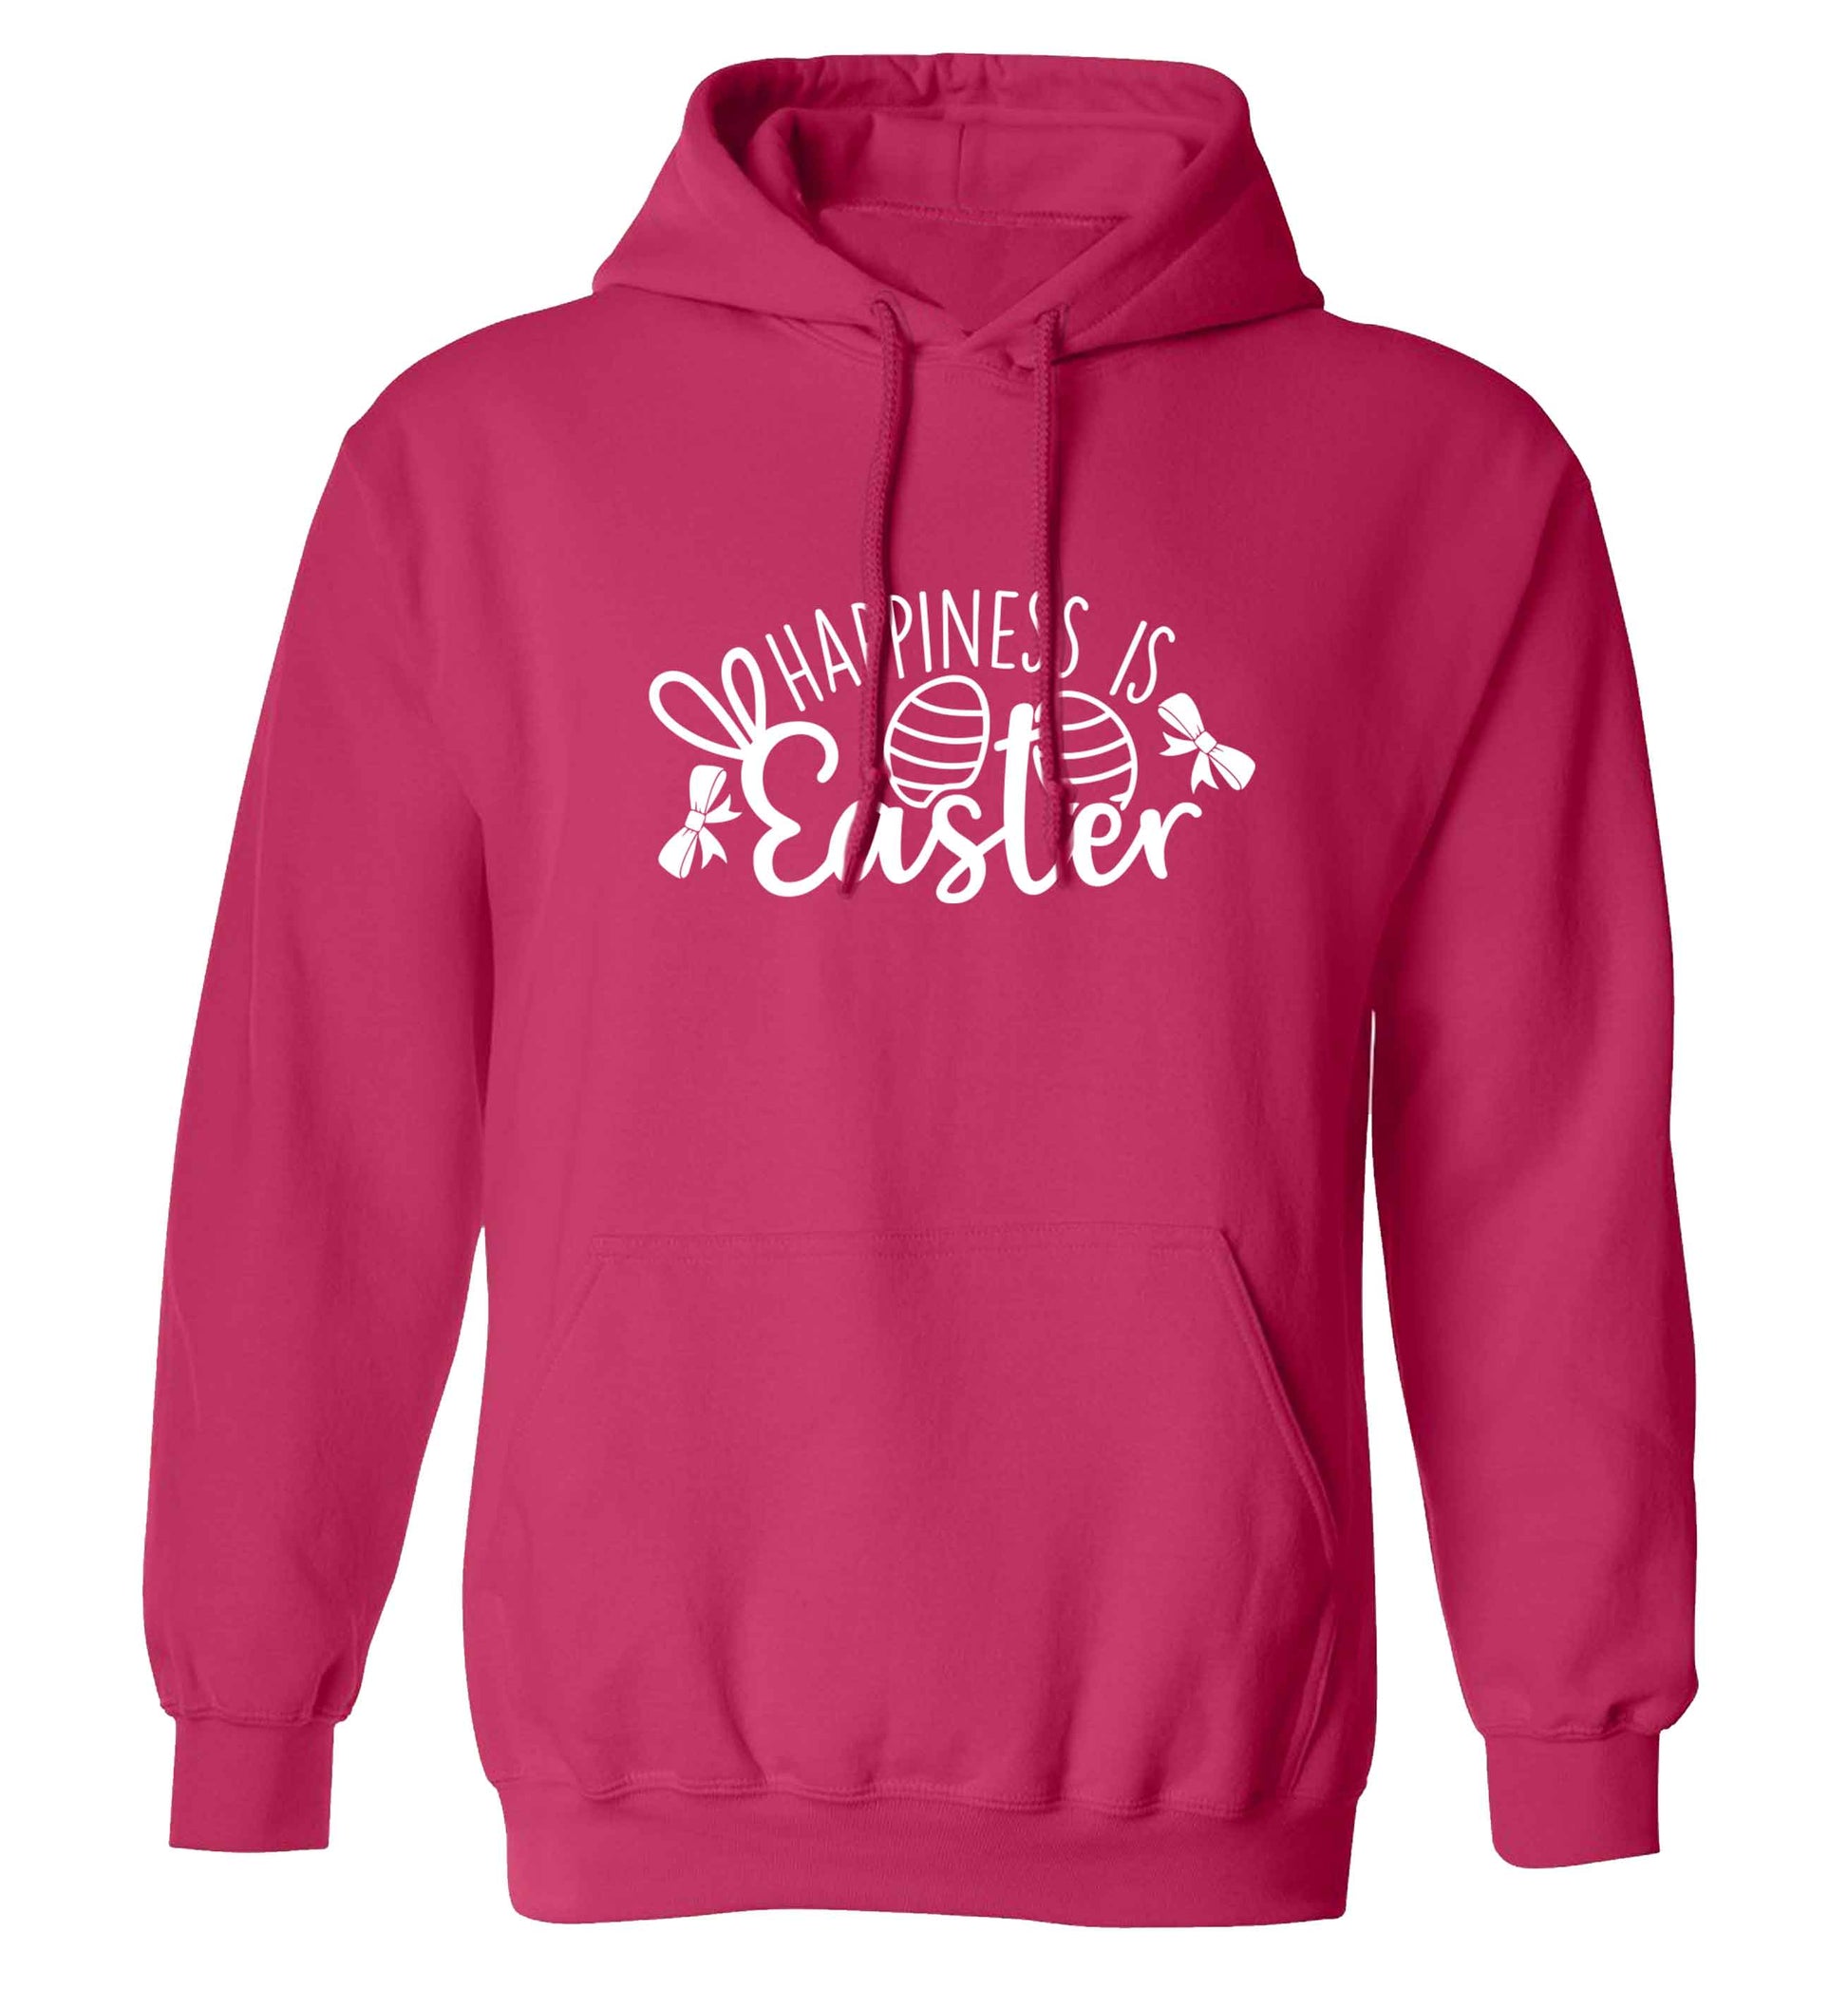 Happiness is easter adults unisex pink hoodie 2XL